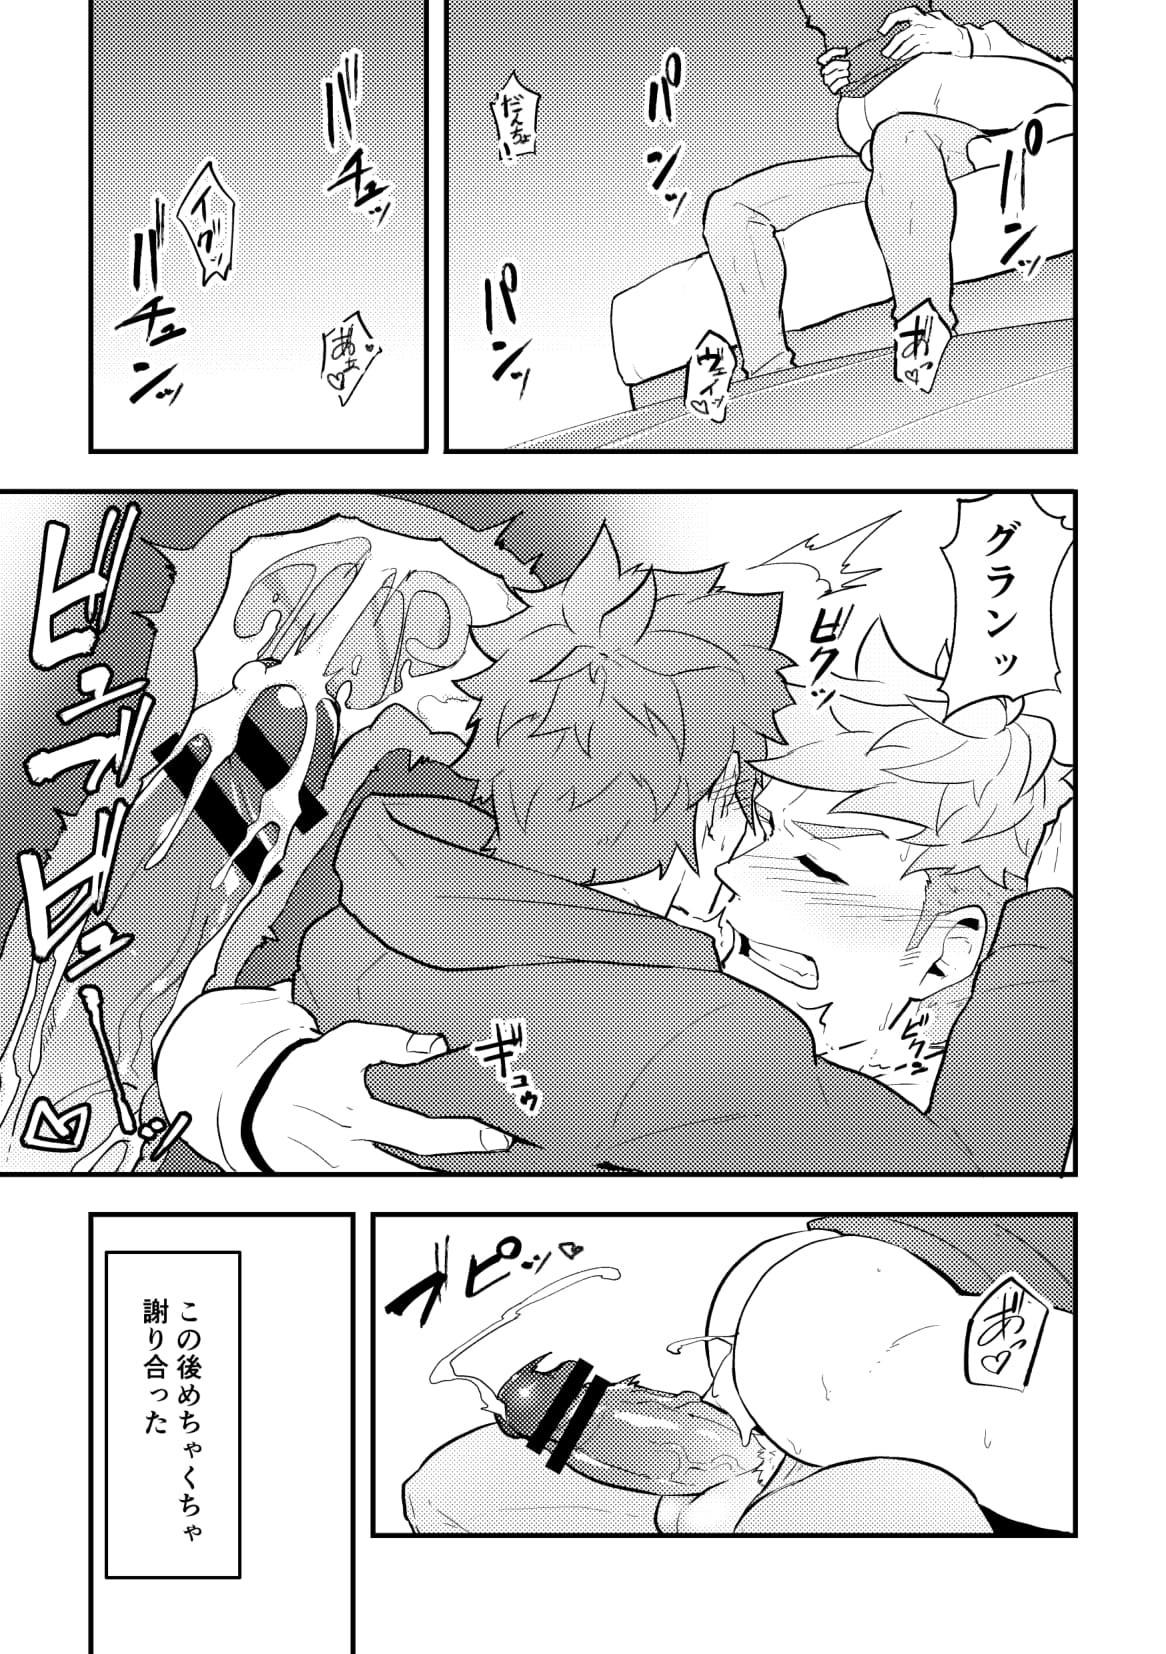 Making Love Porn Onabe Hon C95 - The idolmaster Fate grand order Granblue fantasy Pokemon Fire emblem Castlevania Dragalia lost Punch-out Chupa - Page 5